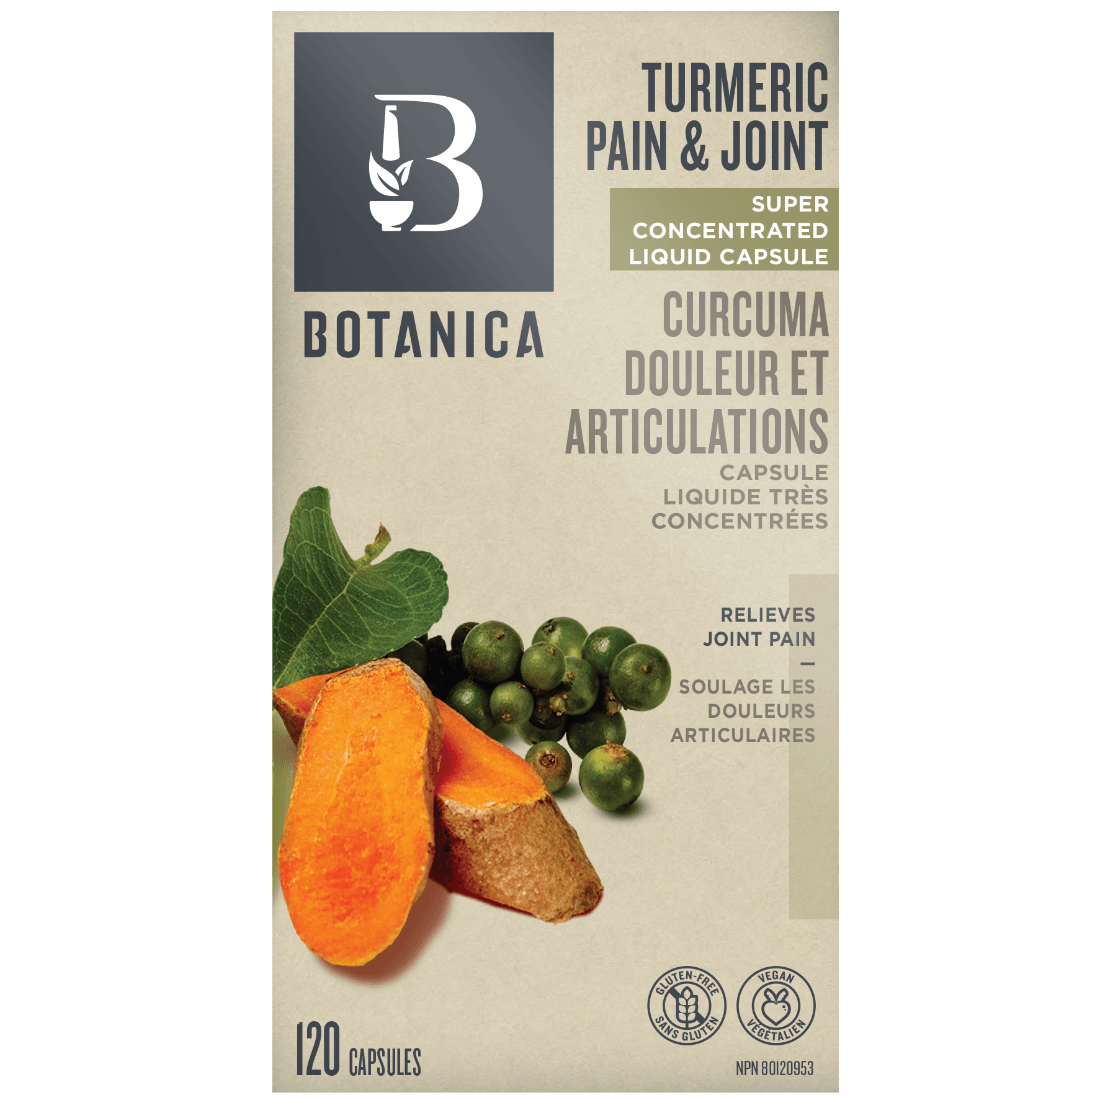 Botanica Turmeric Pain And Joint 120 Capsules Supplements - Joint Care at Village Vitamin Store